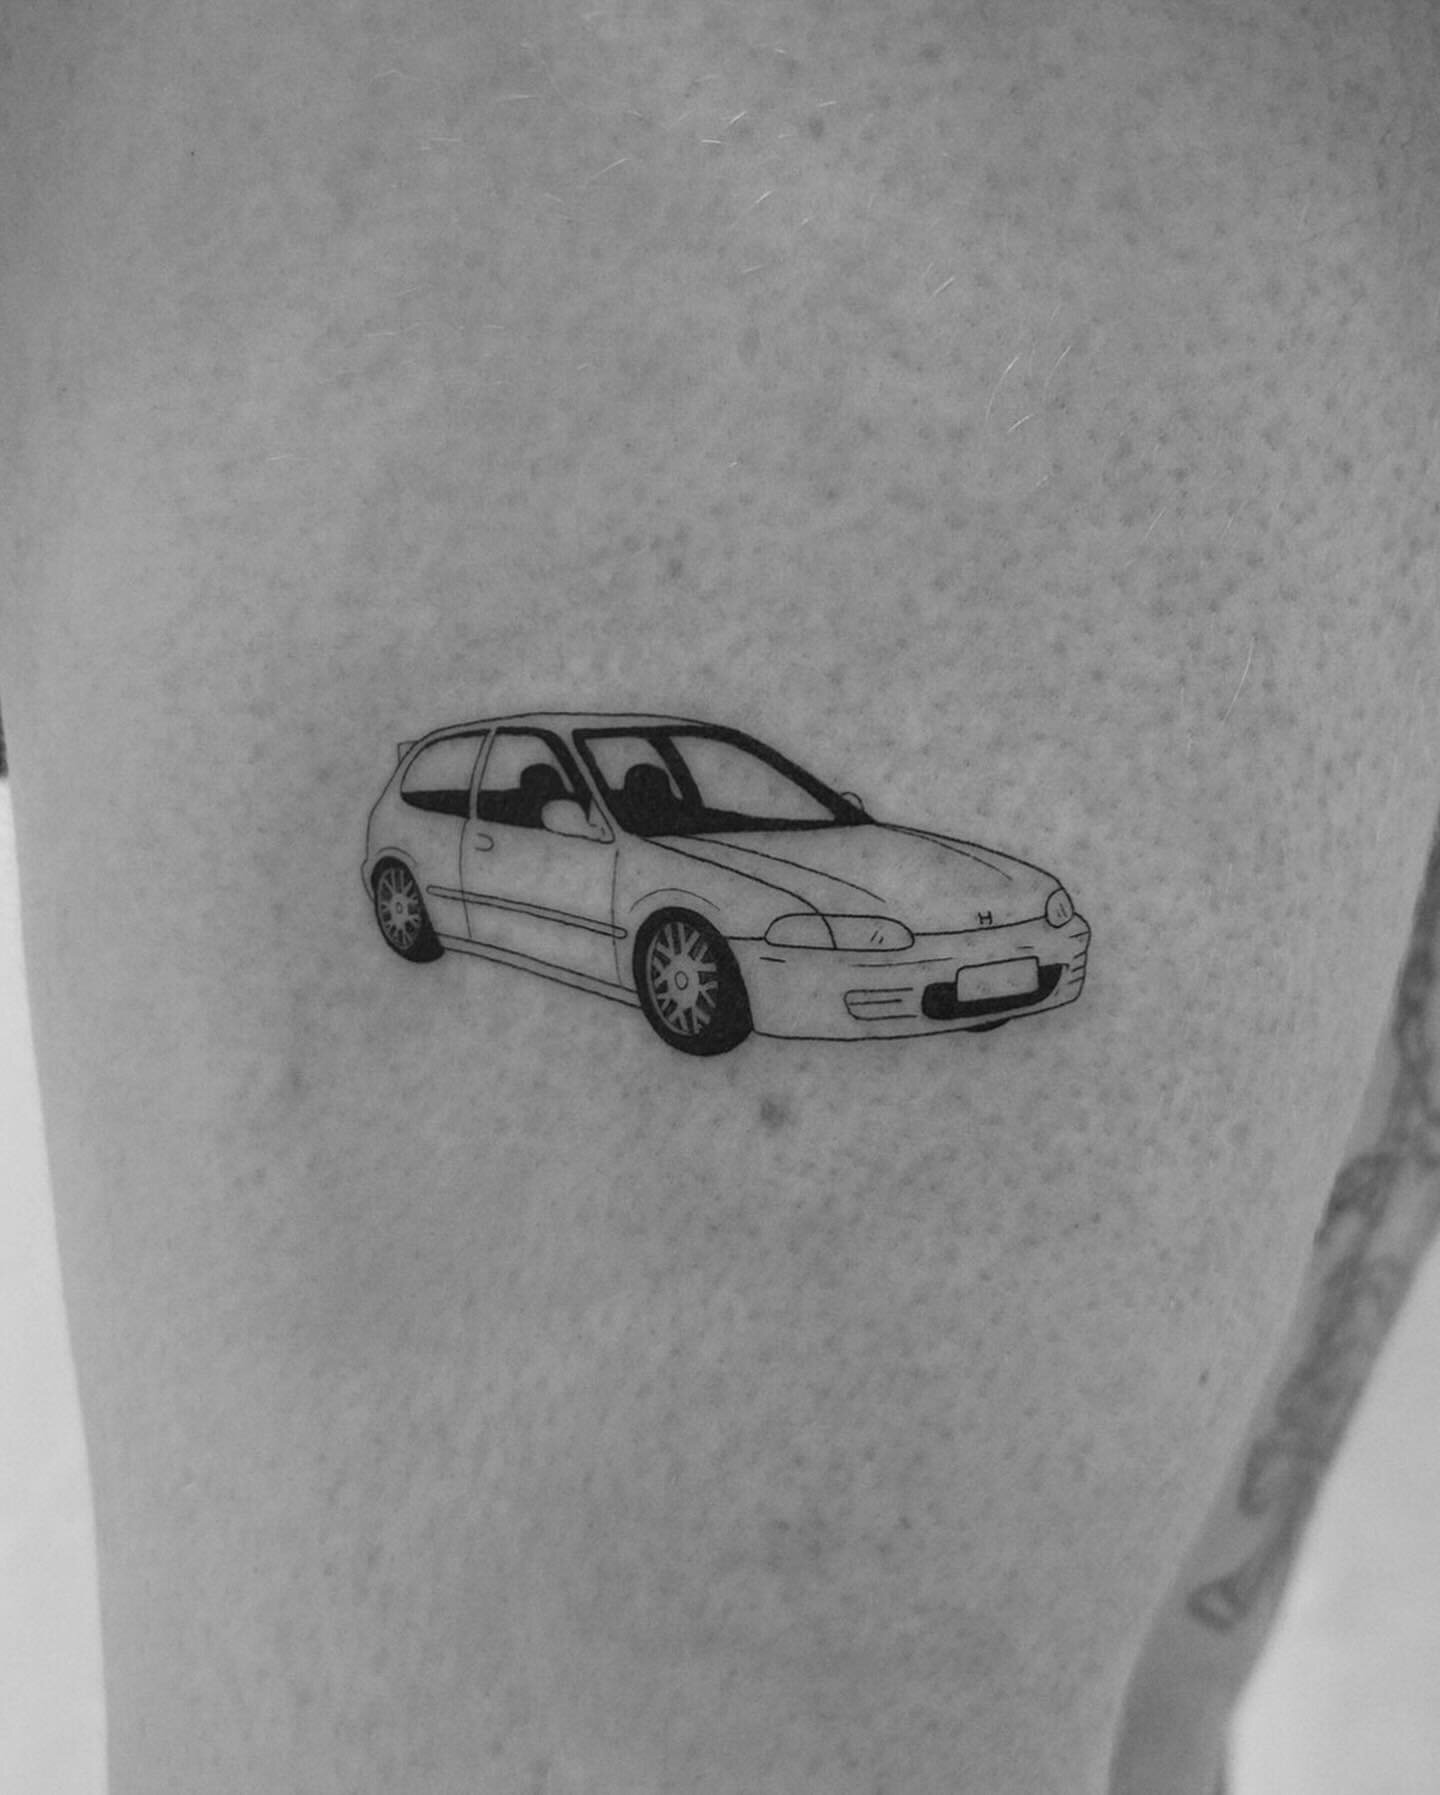 obsessed with @ec.tattoos &lsquo;s car tattys!